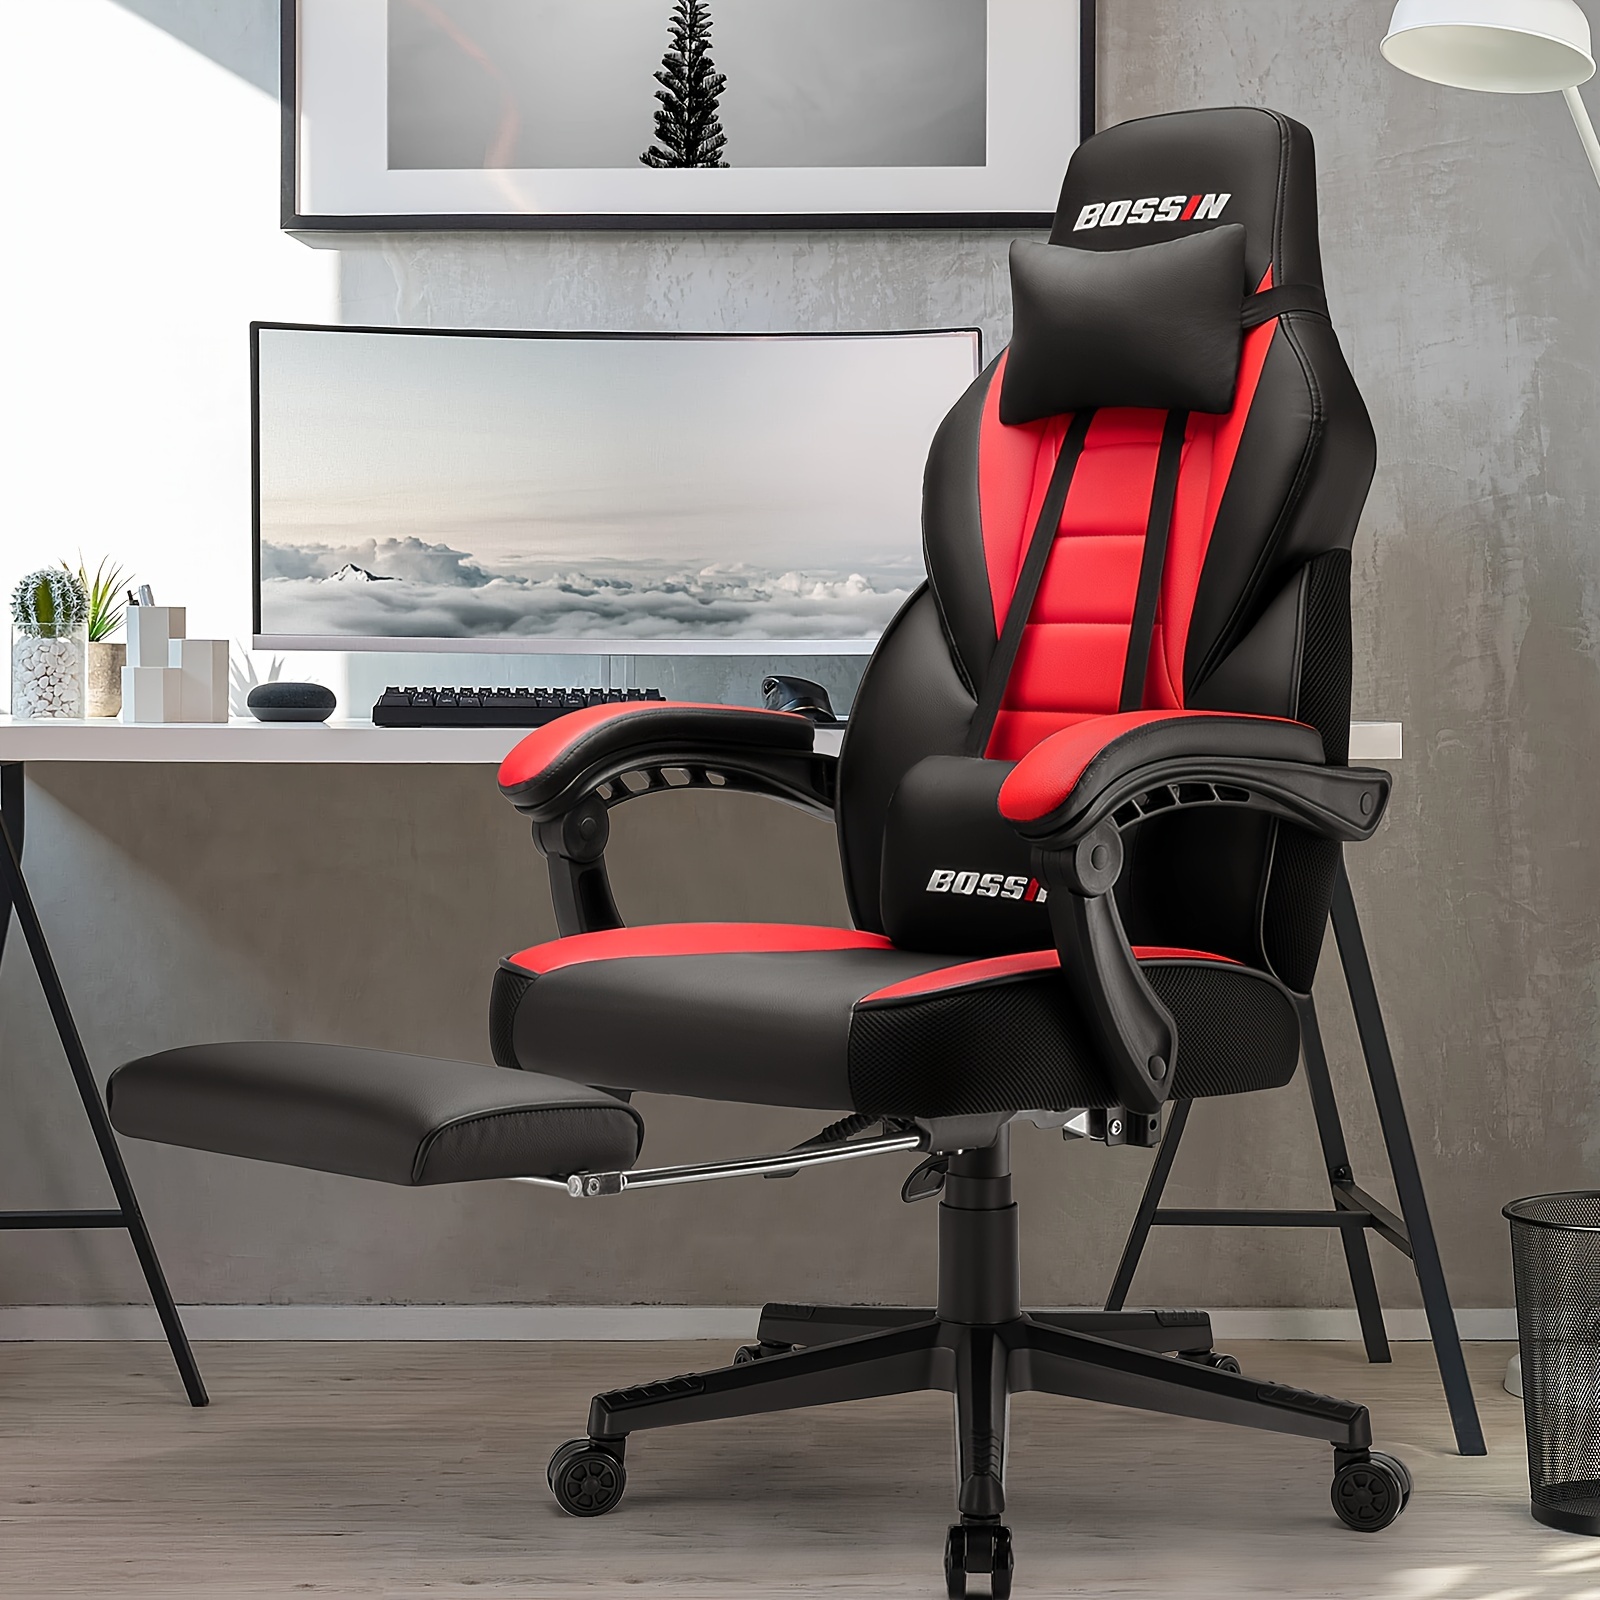 

Gaming Chair With Massage, Ergonomic Heavy Duty Design, Gamer Chair With Footrest And Lumbar Support, High Back Office Chair, Big And Tall Gaming Computer Chair